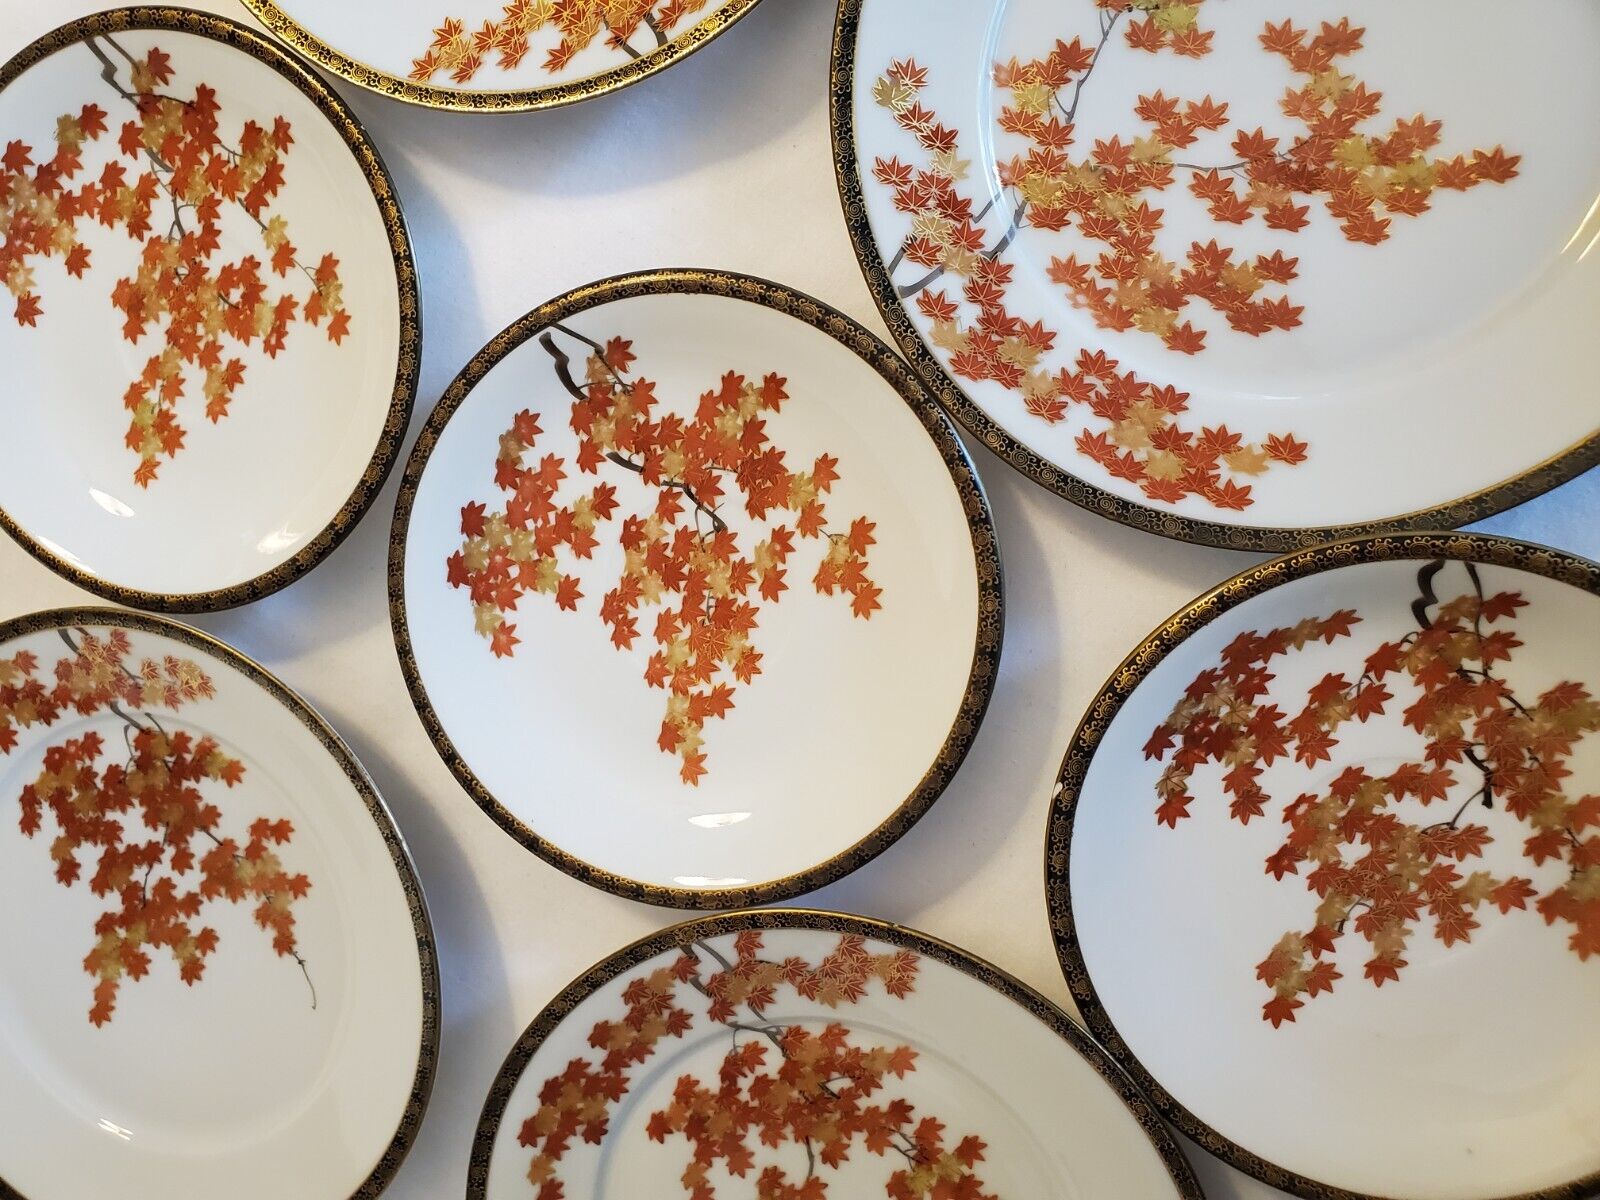 Antique Satsuma Meiji Period Eggshell Saucers and Snack Plates (lot of 18)